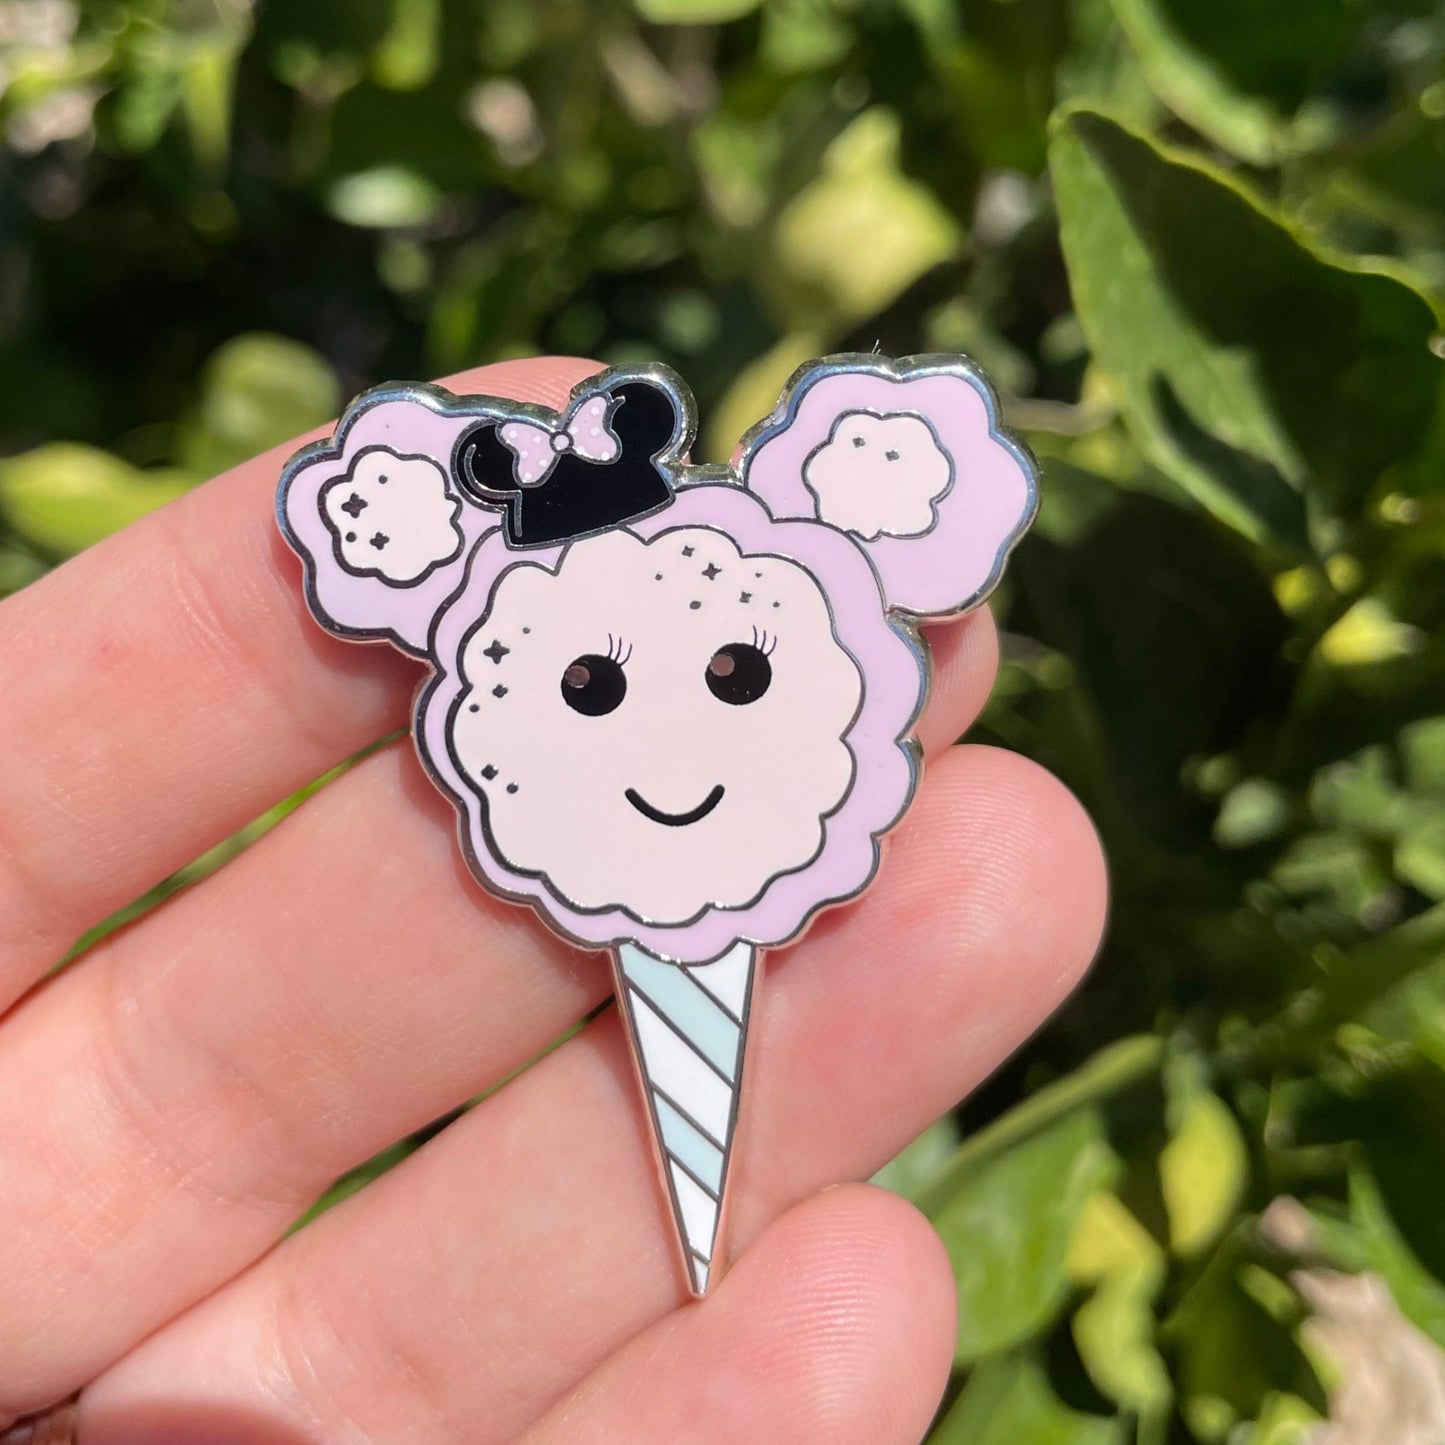 Cotton Candy Pin